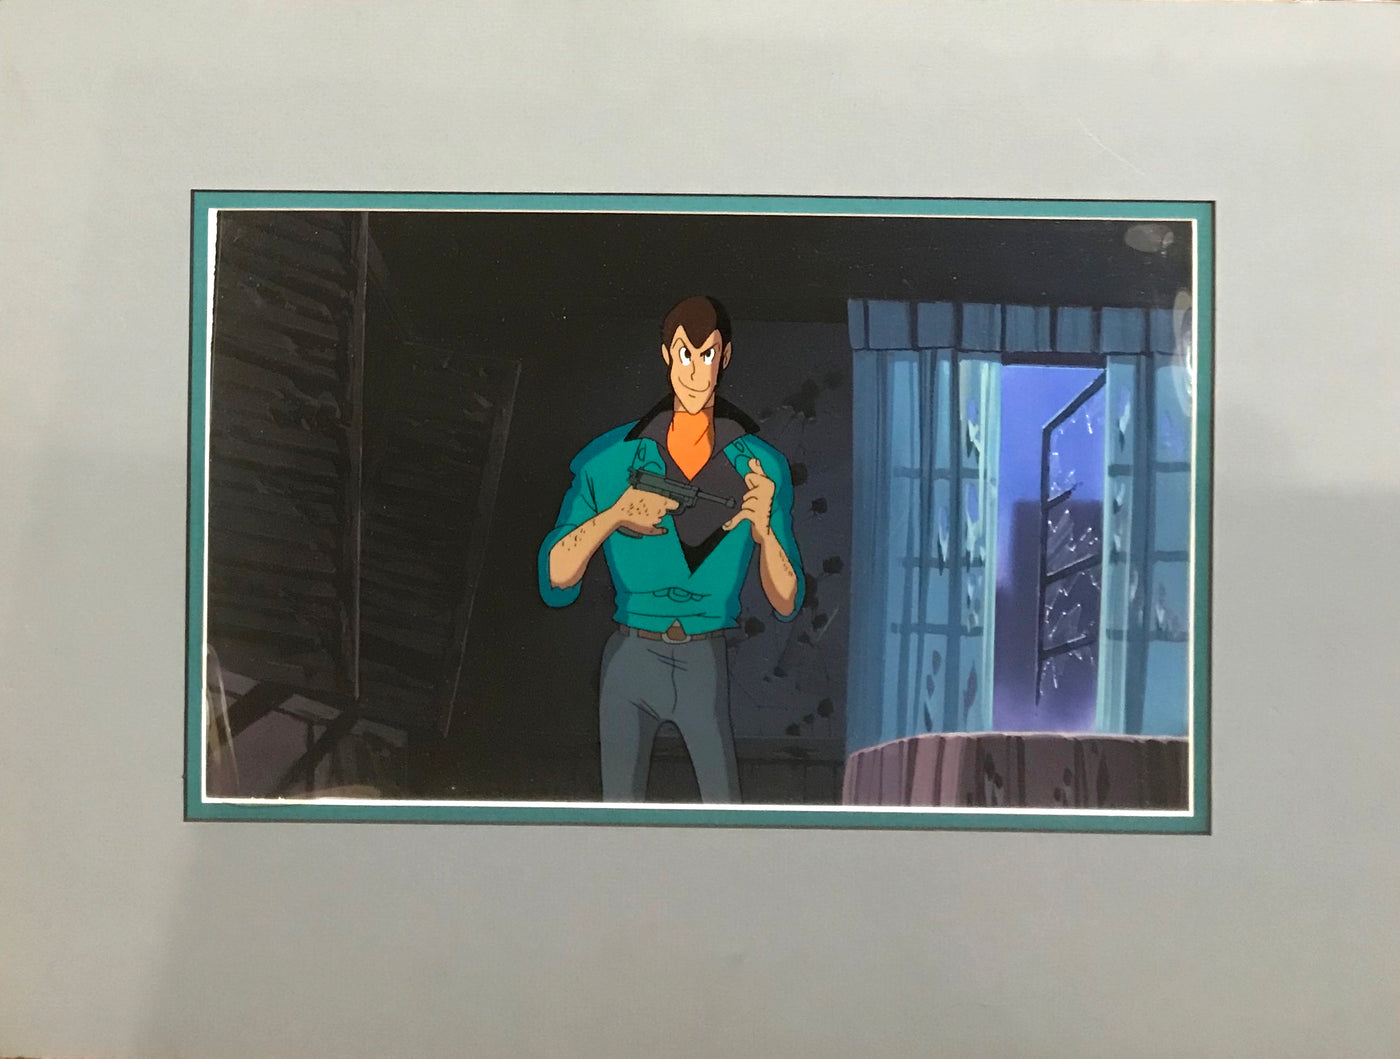 Lupin III Production Cel on Production Background